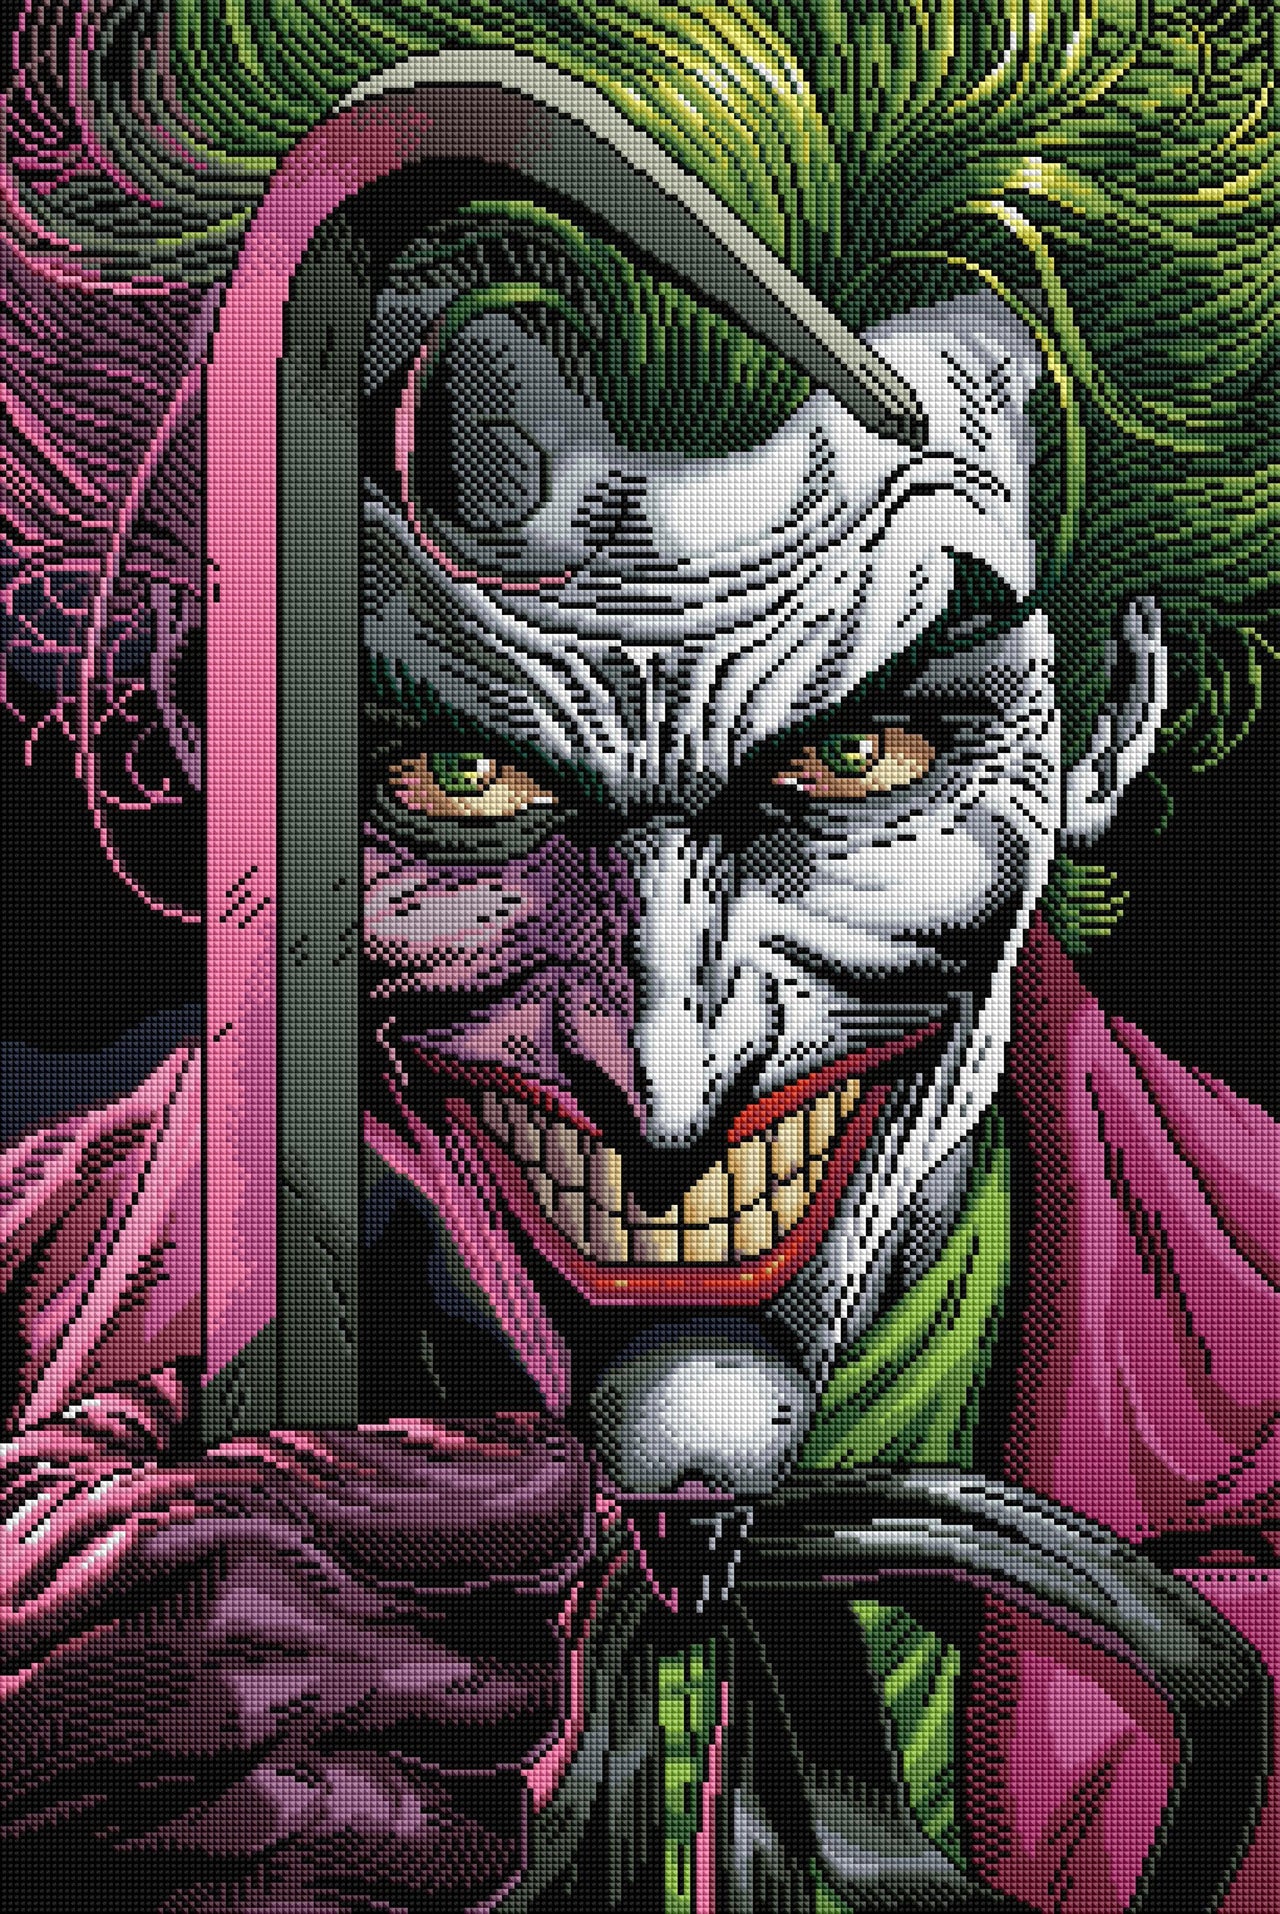 Diamond Painting The Clown Prince of Crime 20" x 30" (51cm x 76cm) / Square With 44 Colors Including 2 ABs / 62,220